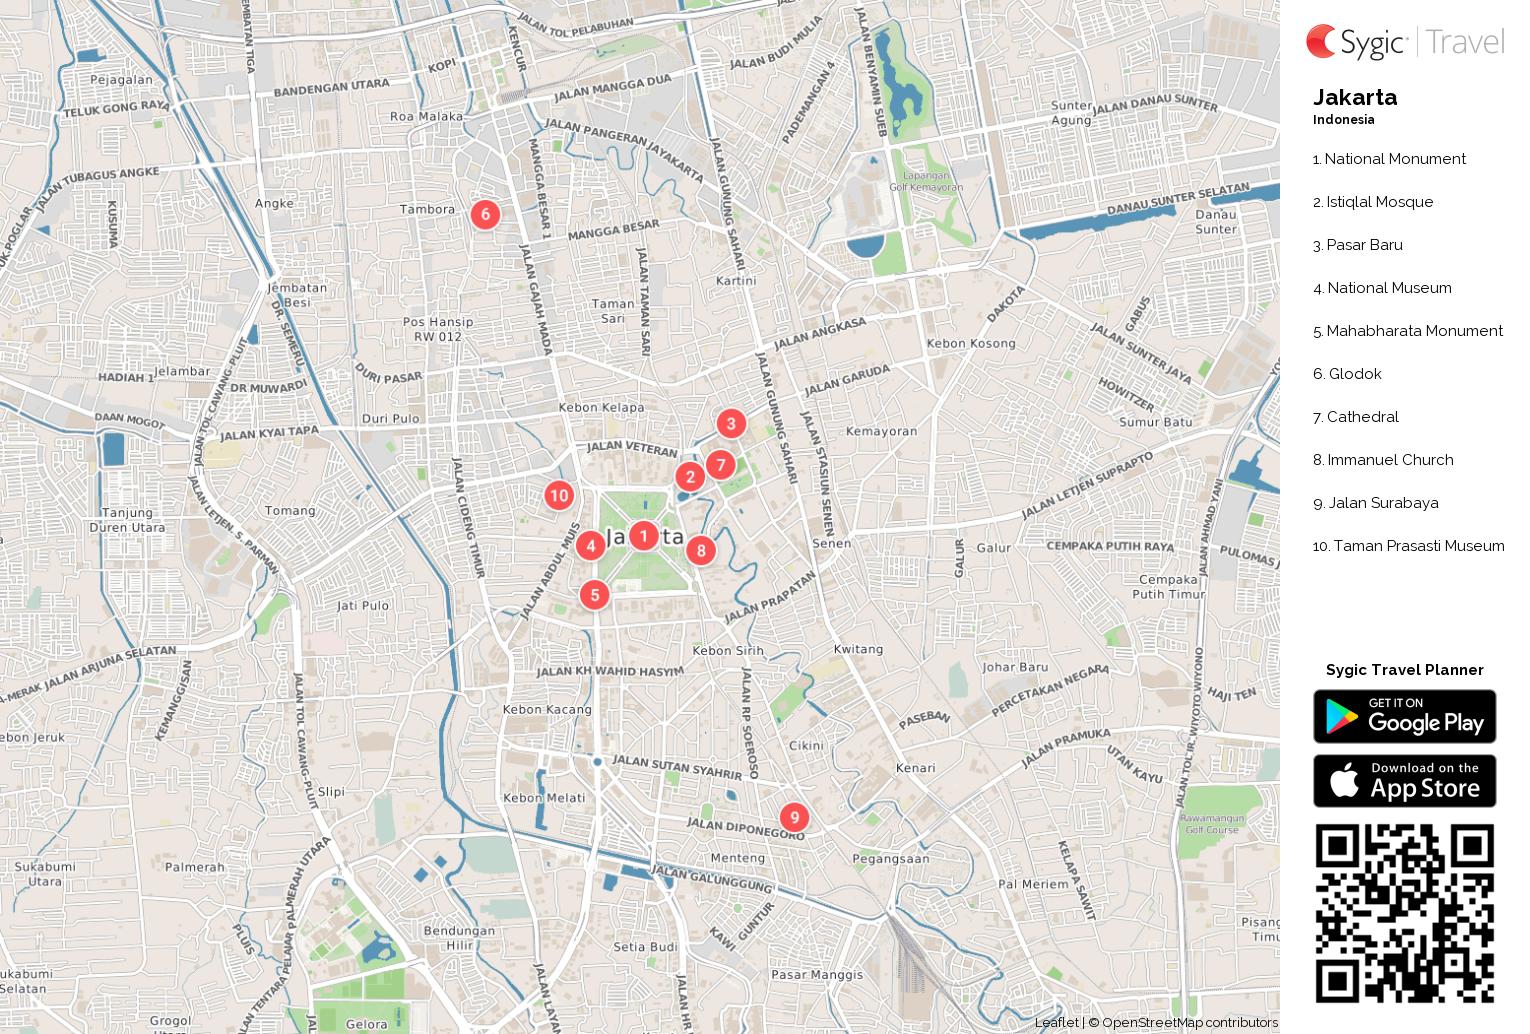 Map of Jakarta tourist: attractions and monuments of Jakarta